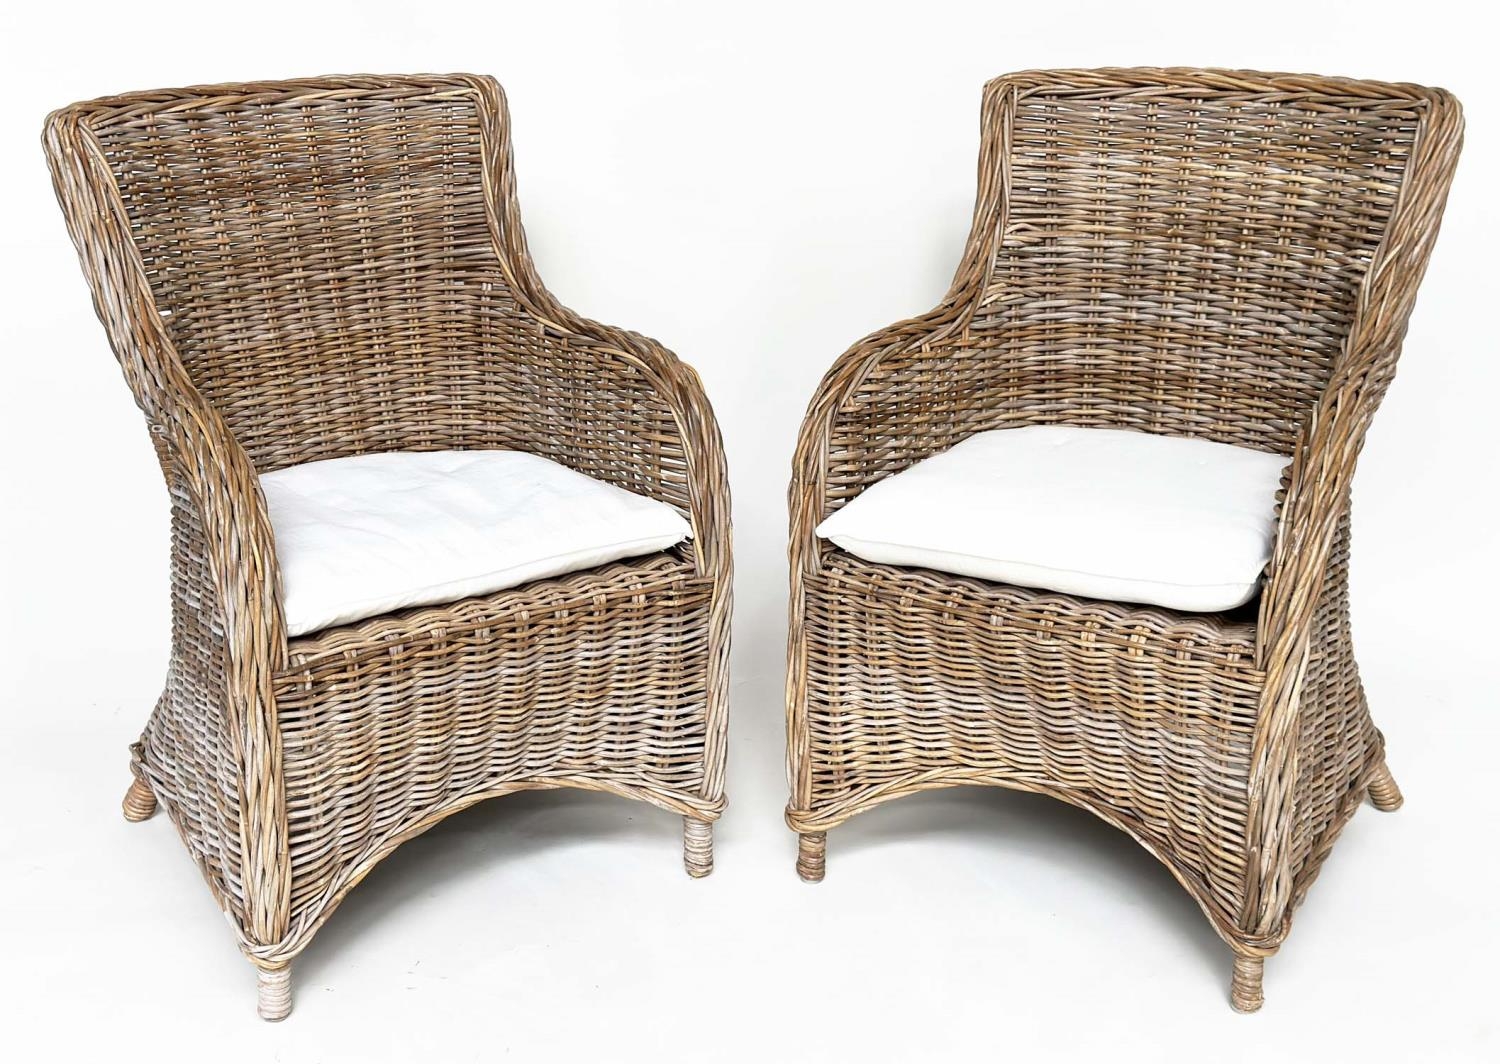 ORANGERY ARMCHAIRS, a pair, rattan framed and woven with cushion seats. (2) - Image 4 of 15